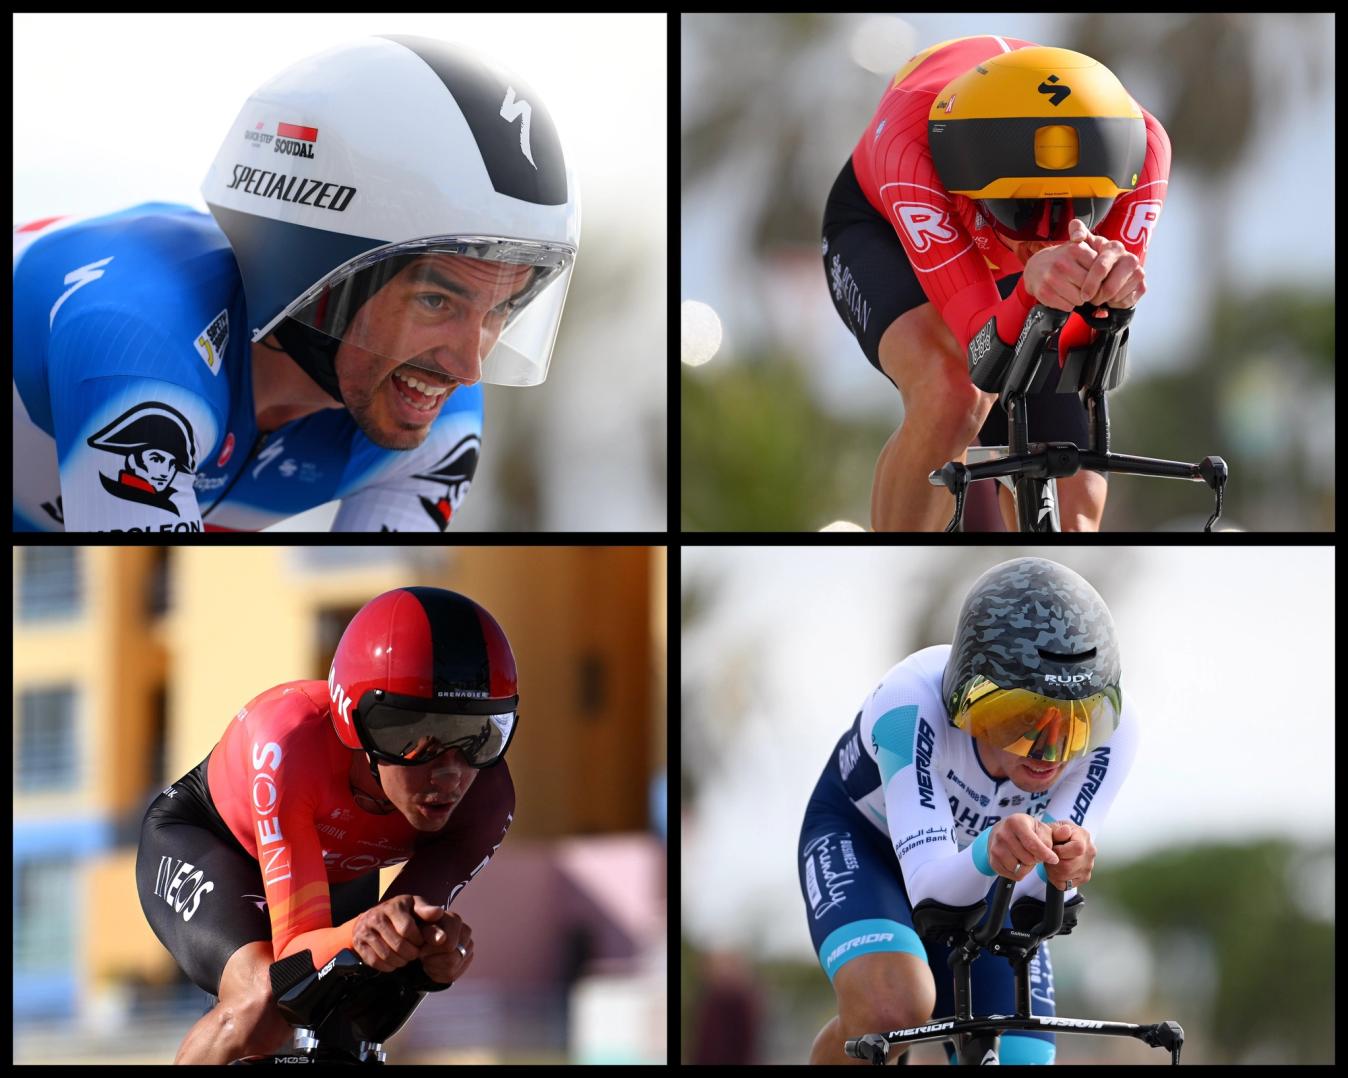 We are in a new (space) age of time trial helmets